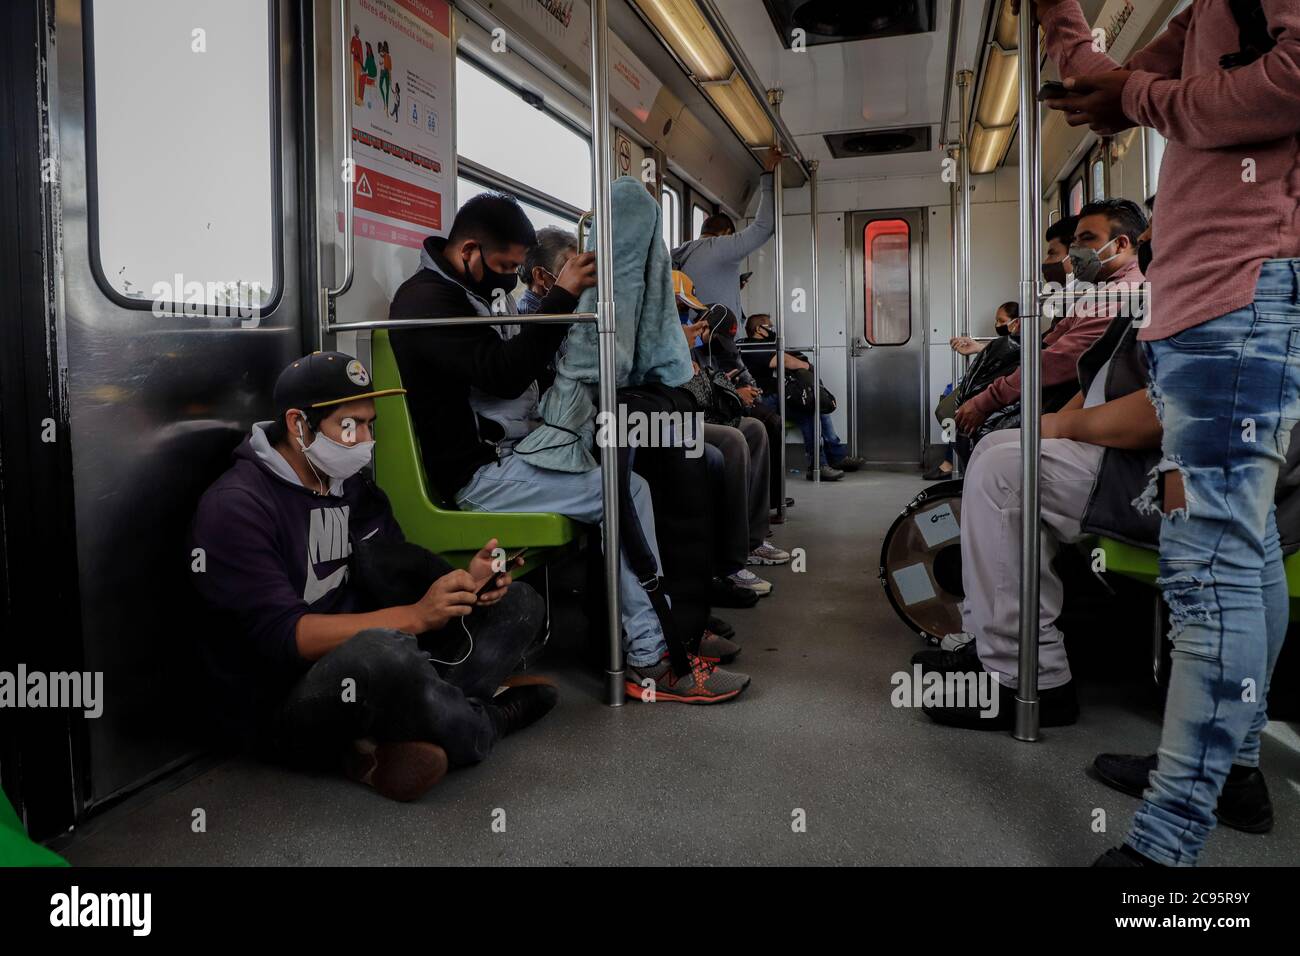 Mexico City, Mexico. 28th July, 2020. People are seen wearing masks on public transport in Mexico City, Mexico, July 28, 2020. Mexico registered 7,208 new COVID-19 cases, bringing the nationwide count to 402,697 cases, the health ministry said Tuesday. Credit: Str/Xinhua/Alamy Live News Stock Photo